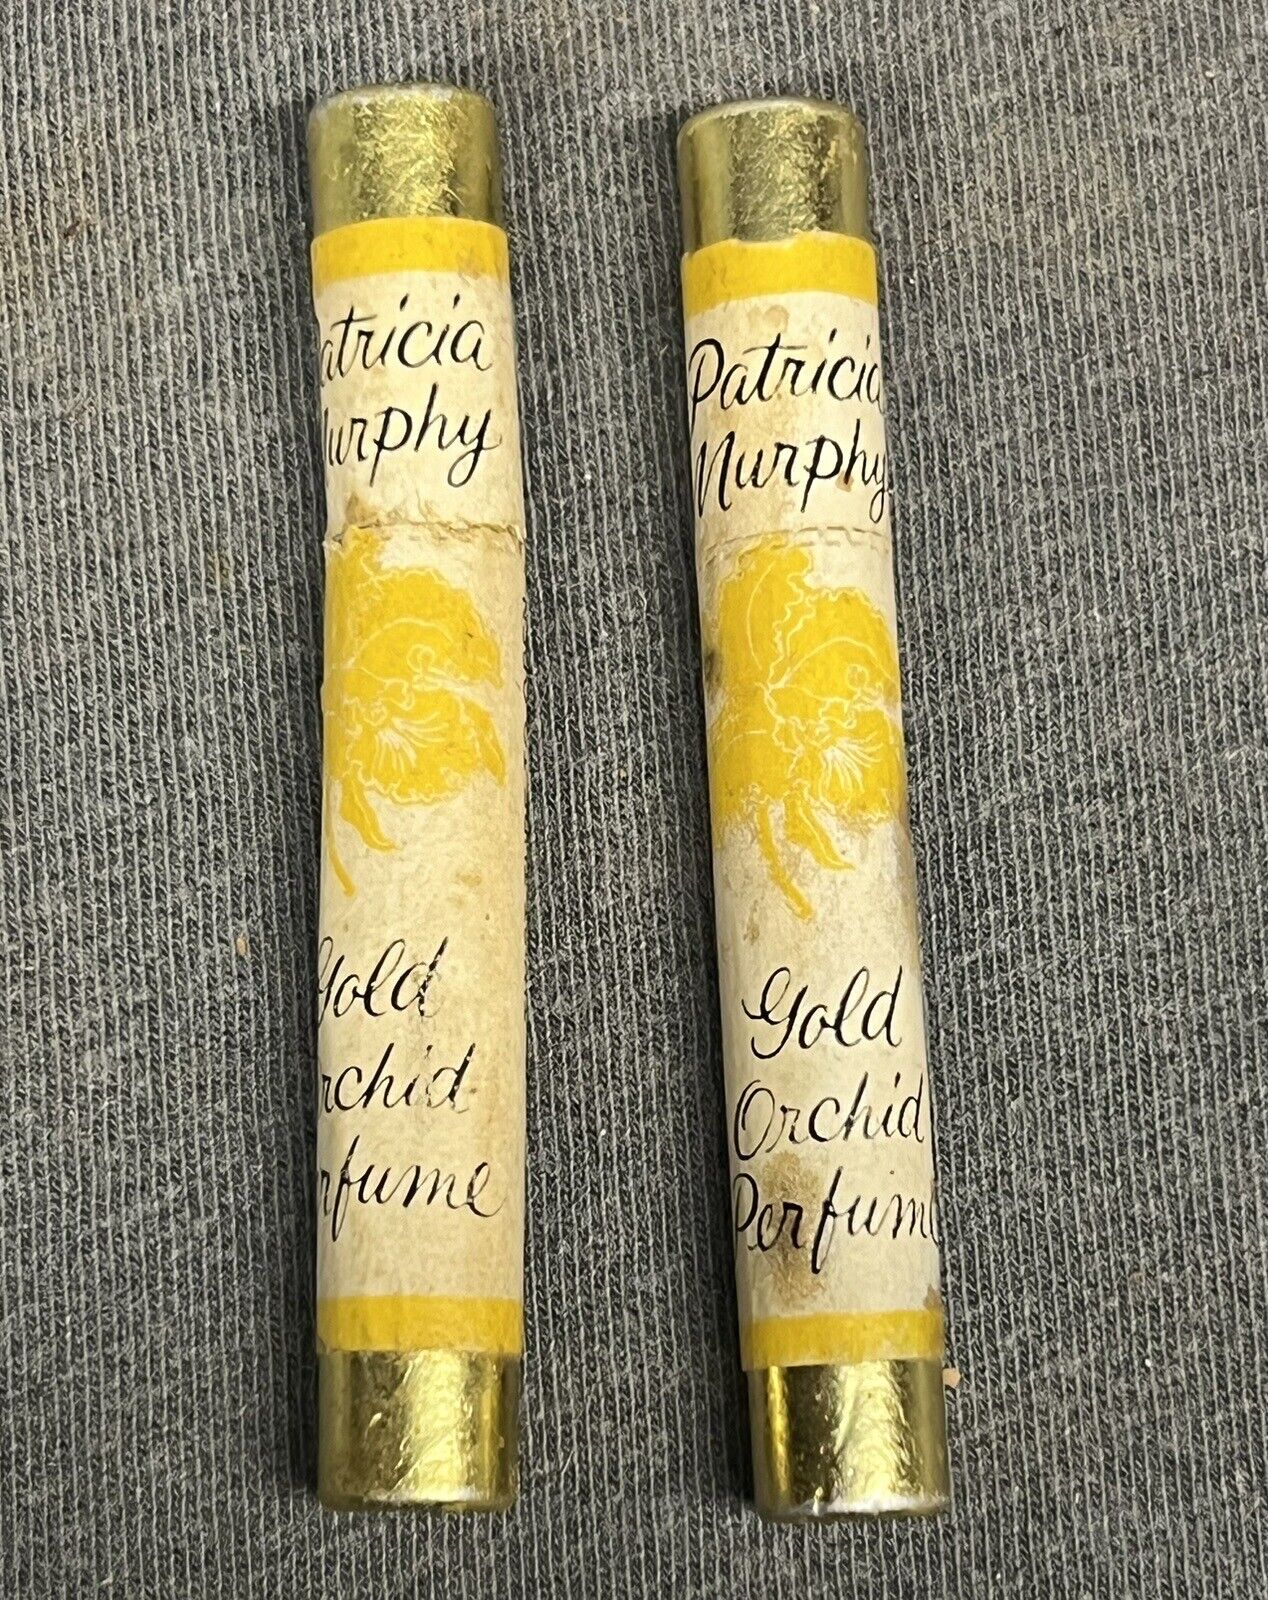 2 Patricia Murphy Gold Orchid Perfume Vintage Sample Vials